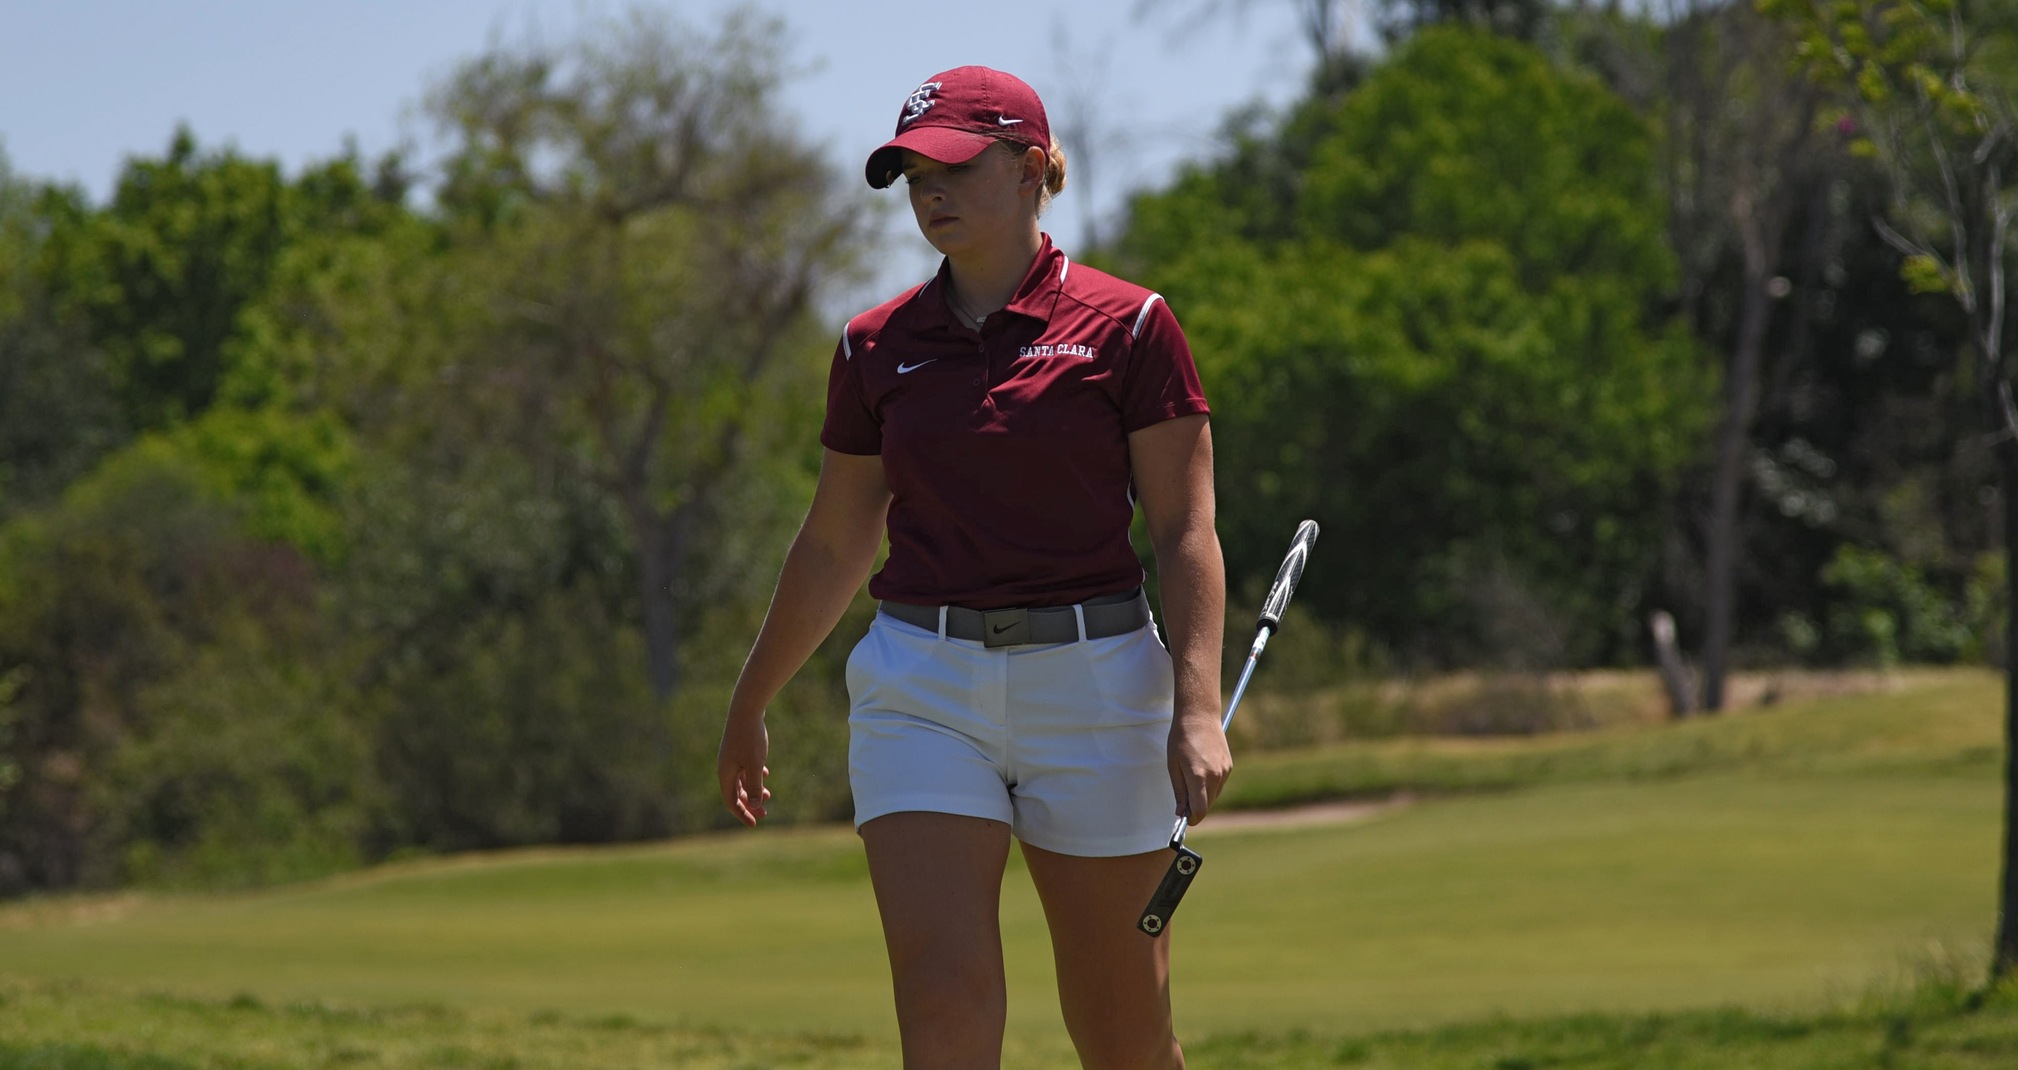 Women’s Golf 11th After Two Rounds Of BYU Entrada Classic